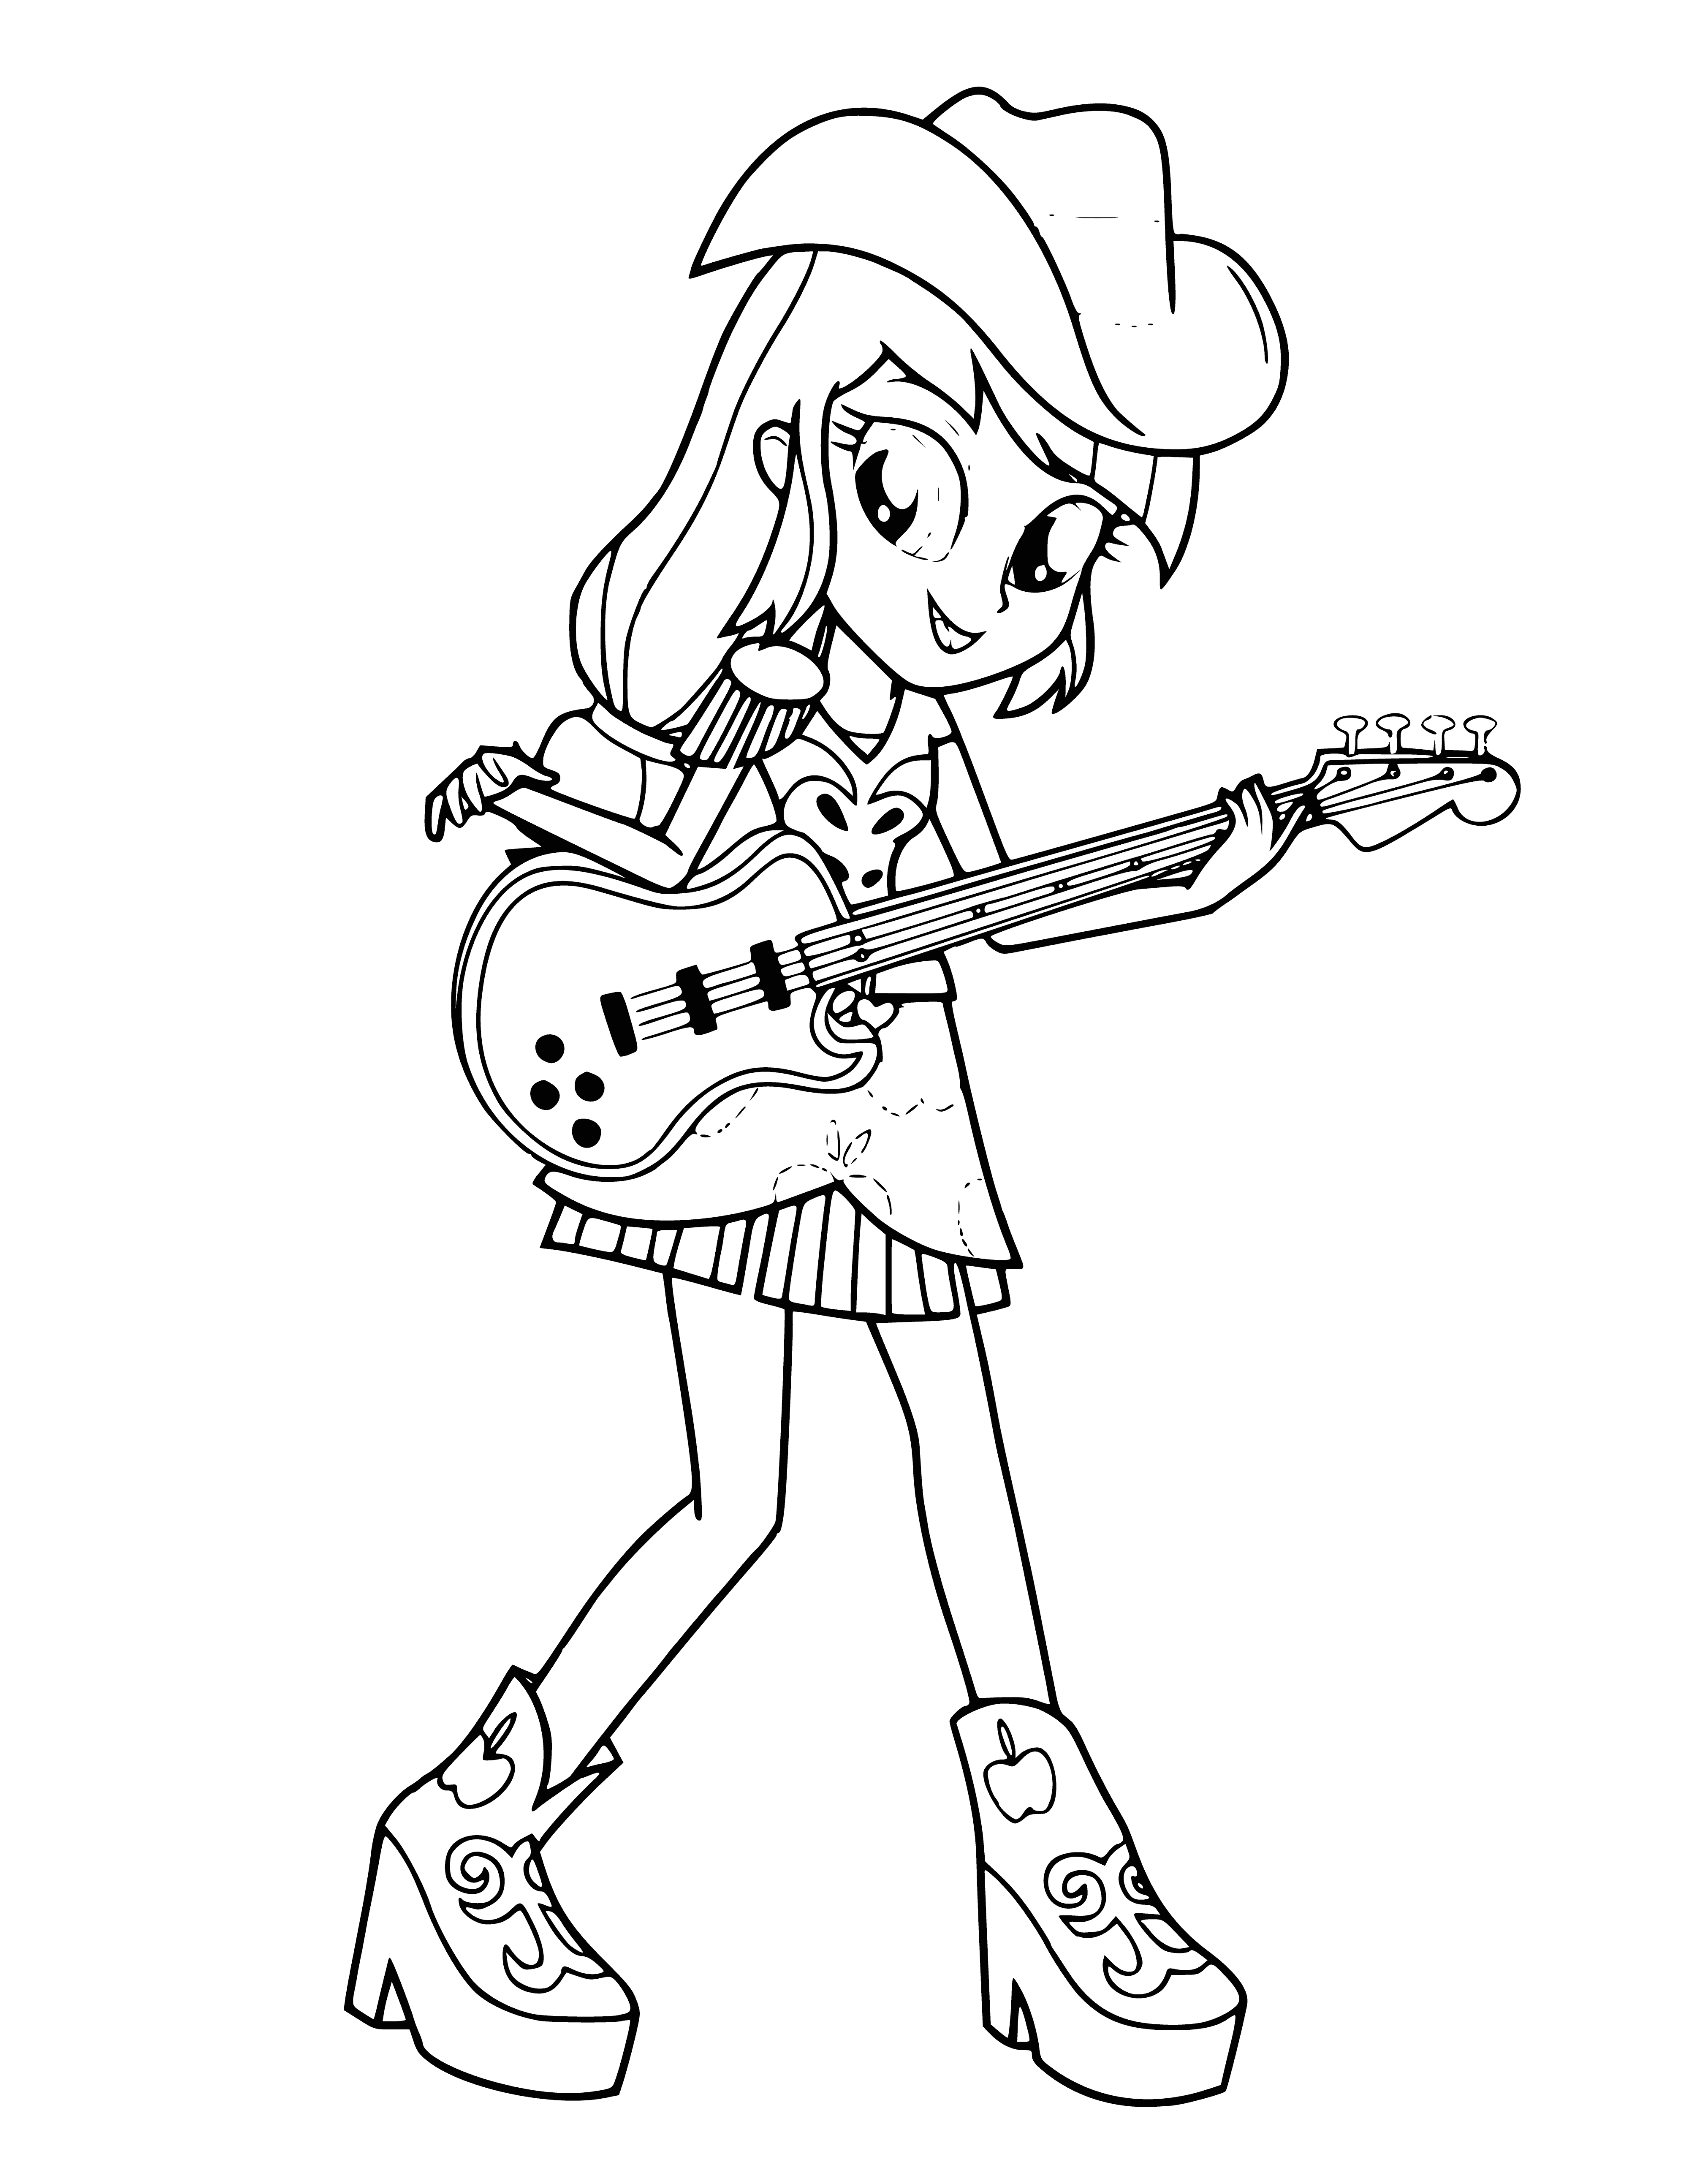 coloring page: Applejack is a fair-skinned, freckled girl with amber eyes and an orange mane with yellow streak. Wears green shirt, brown vest and belt, and cowboy boots. #MLPMYLittlePony